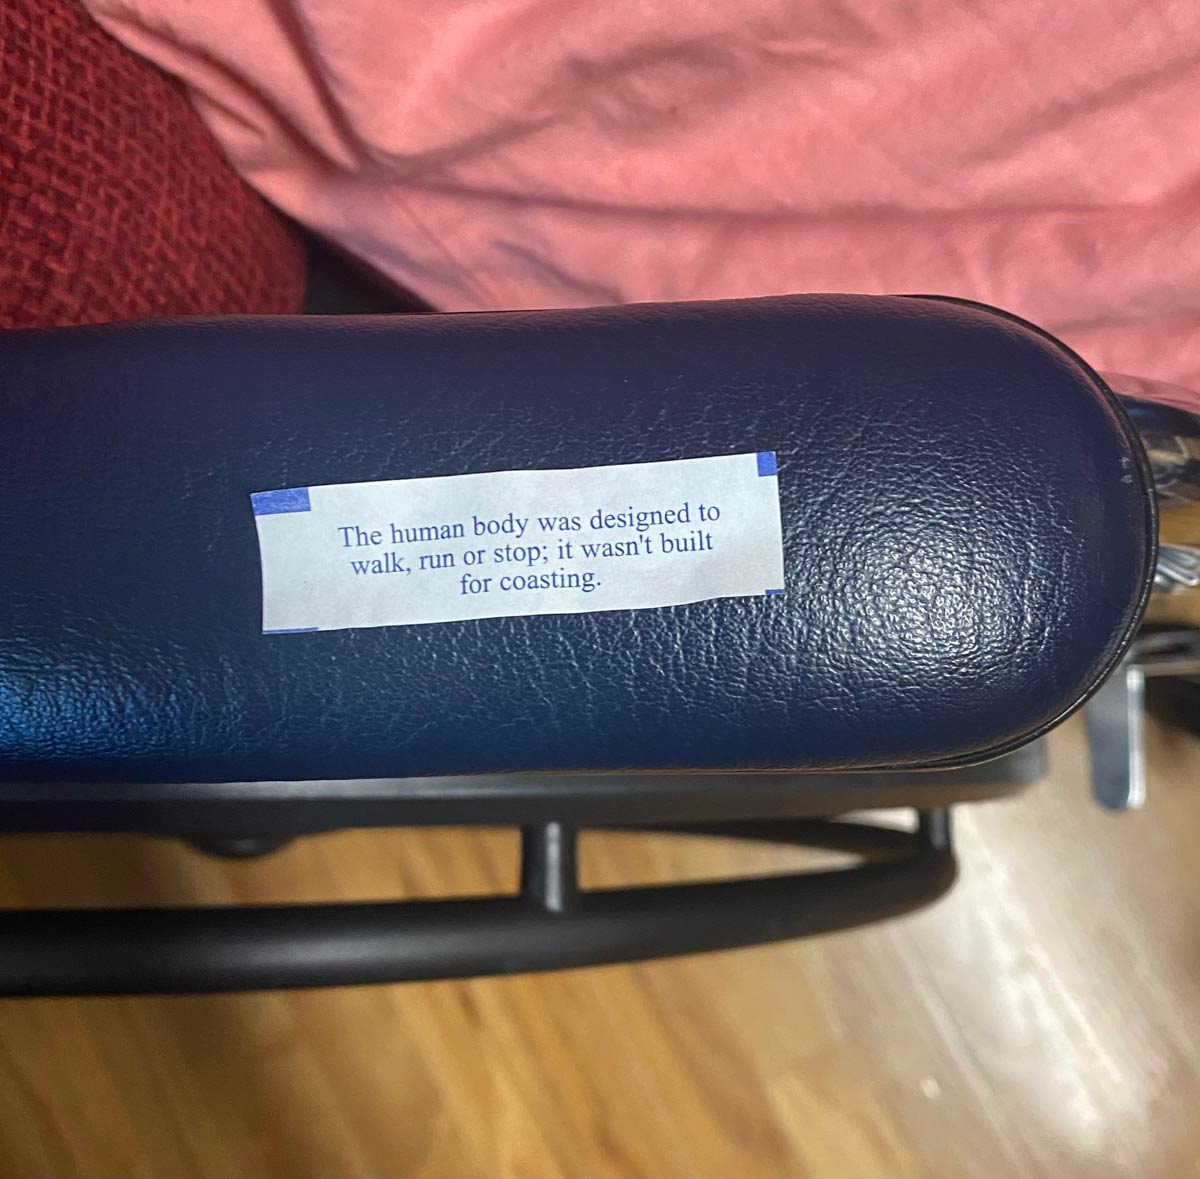 My daughter is in a wheelchair temporarily due to a broken pelvis and this was her fortune today